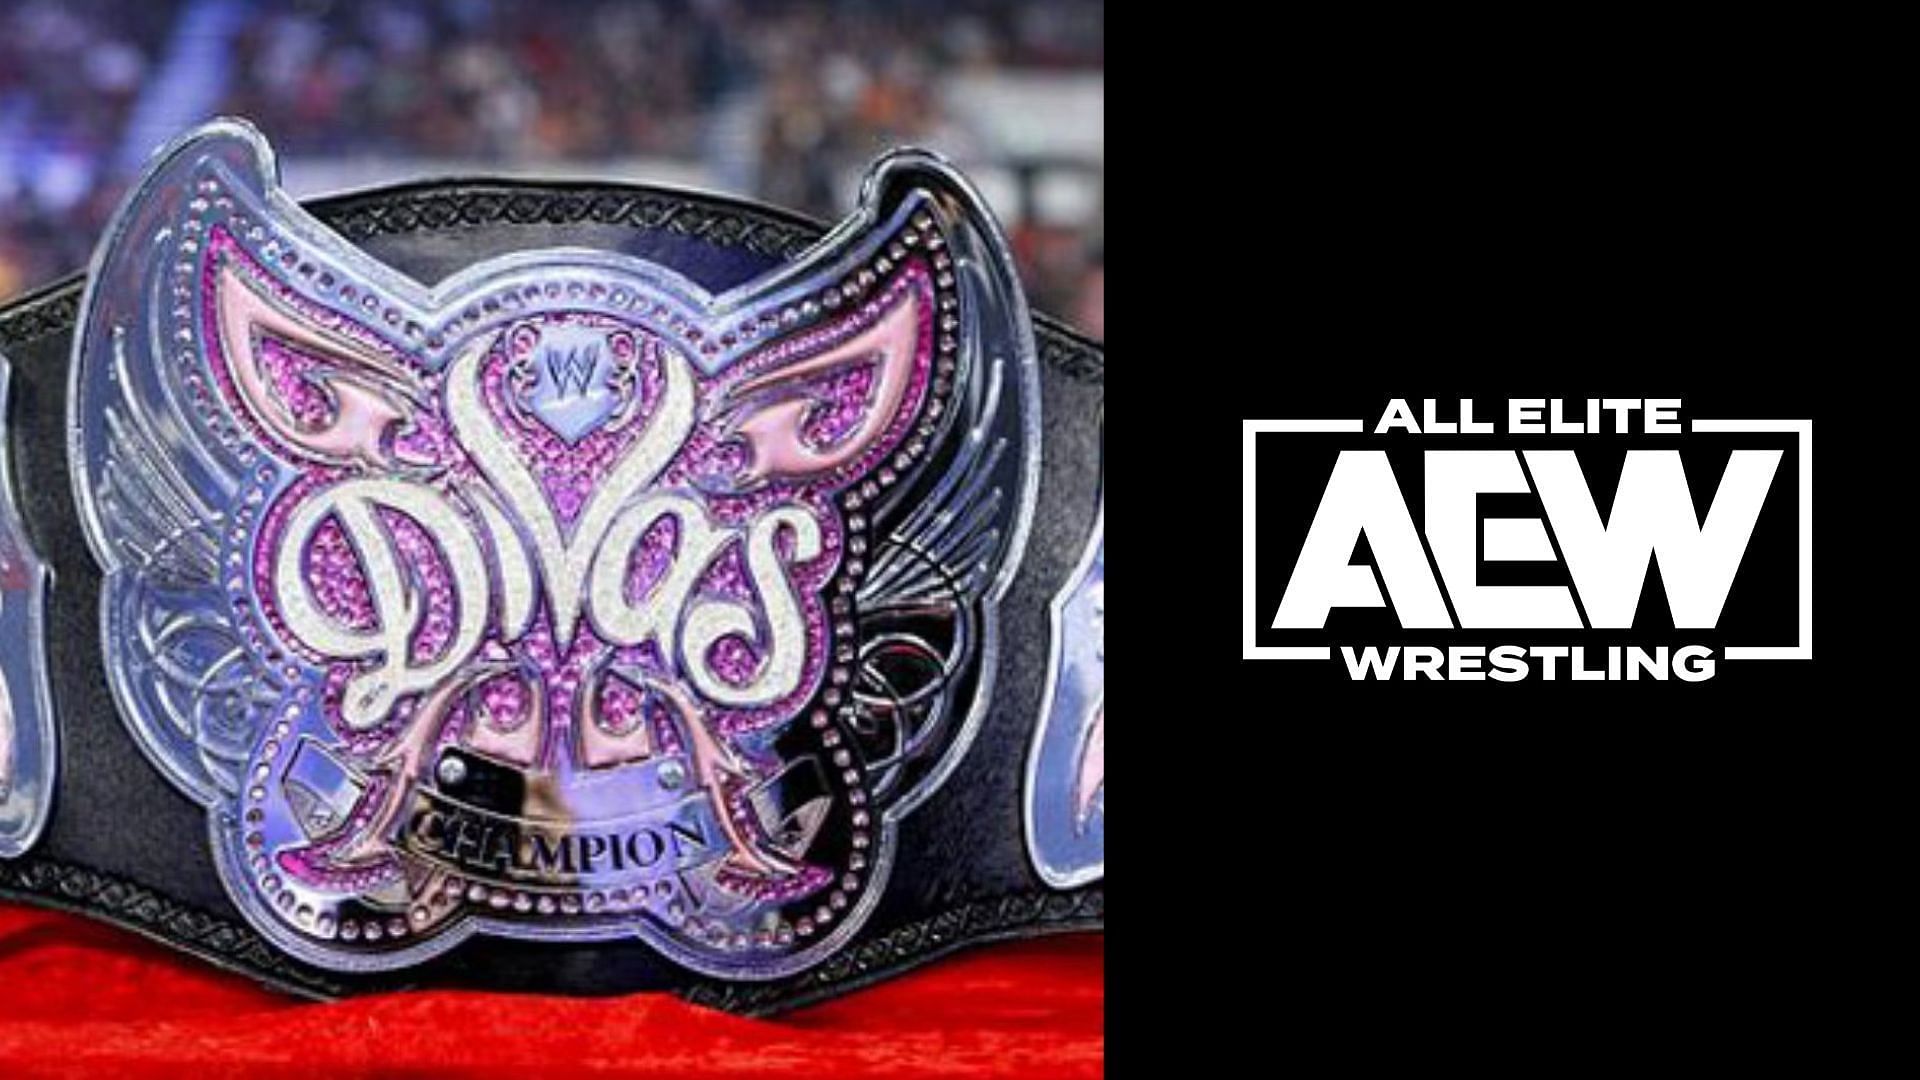 WWE Divas Championship was retired in April 2016 